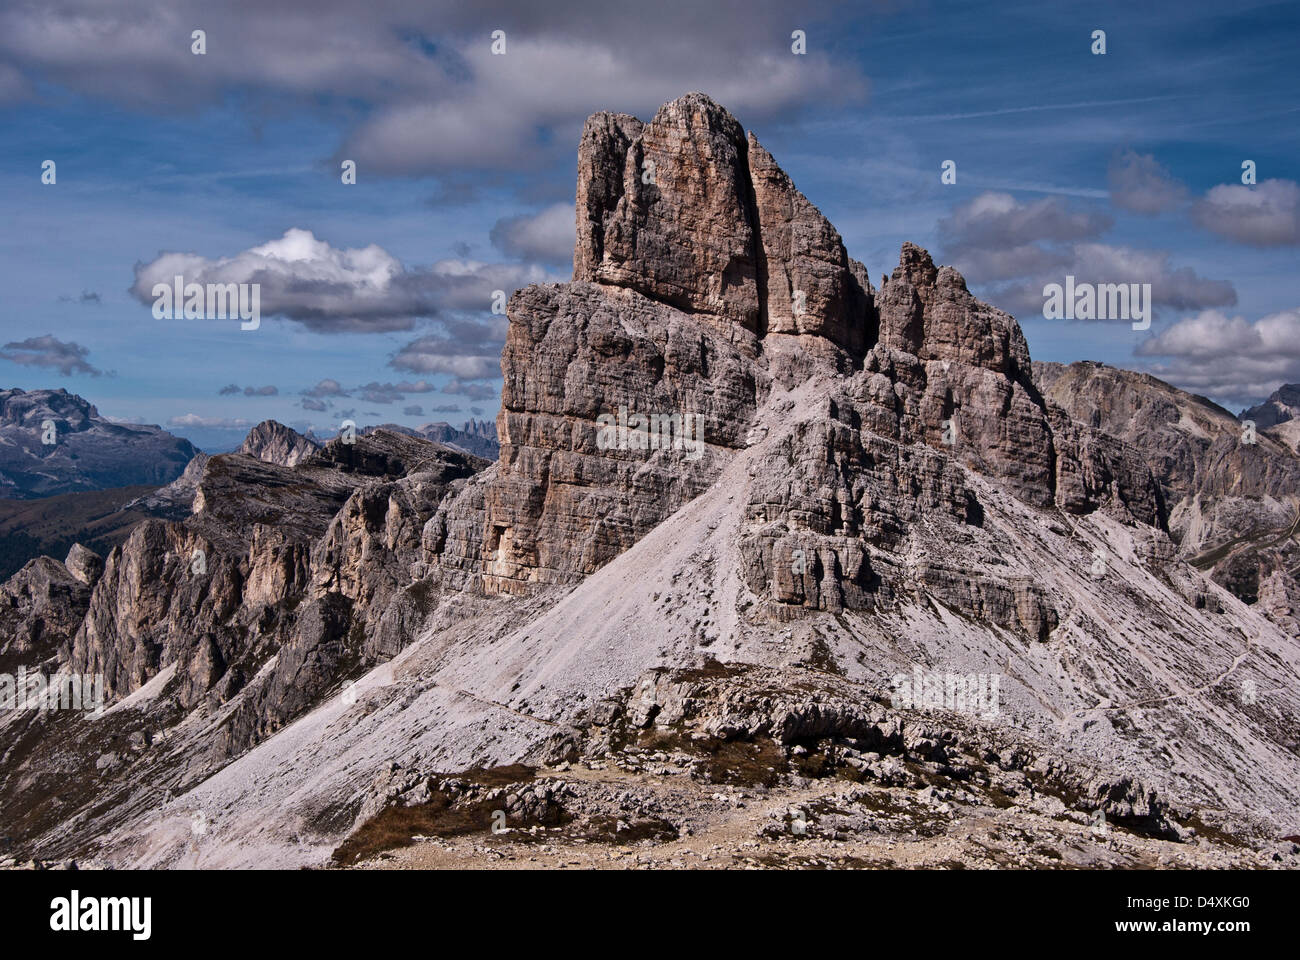 Averau peak in Dolomites near Passo Falzarego and Cortina d´Ampezzo in Italy during nice autumn day with blue sky and few small clouds Stock Photo